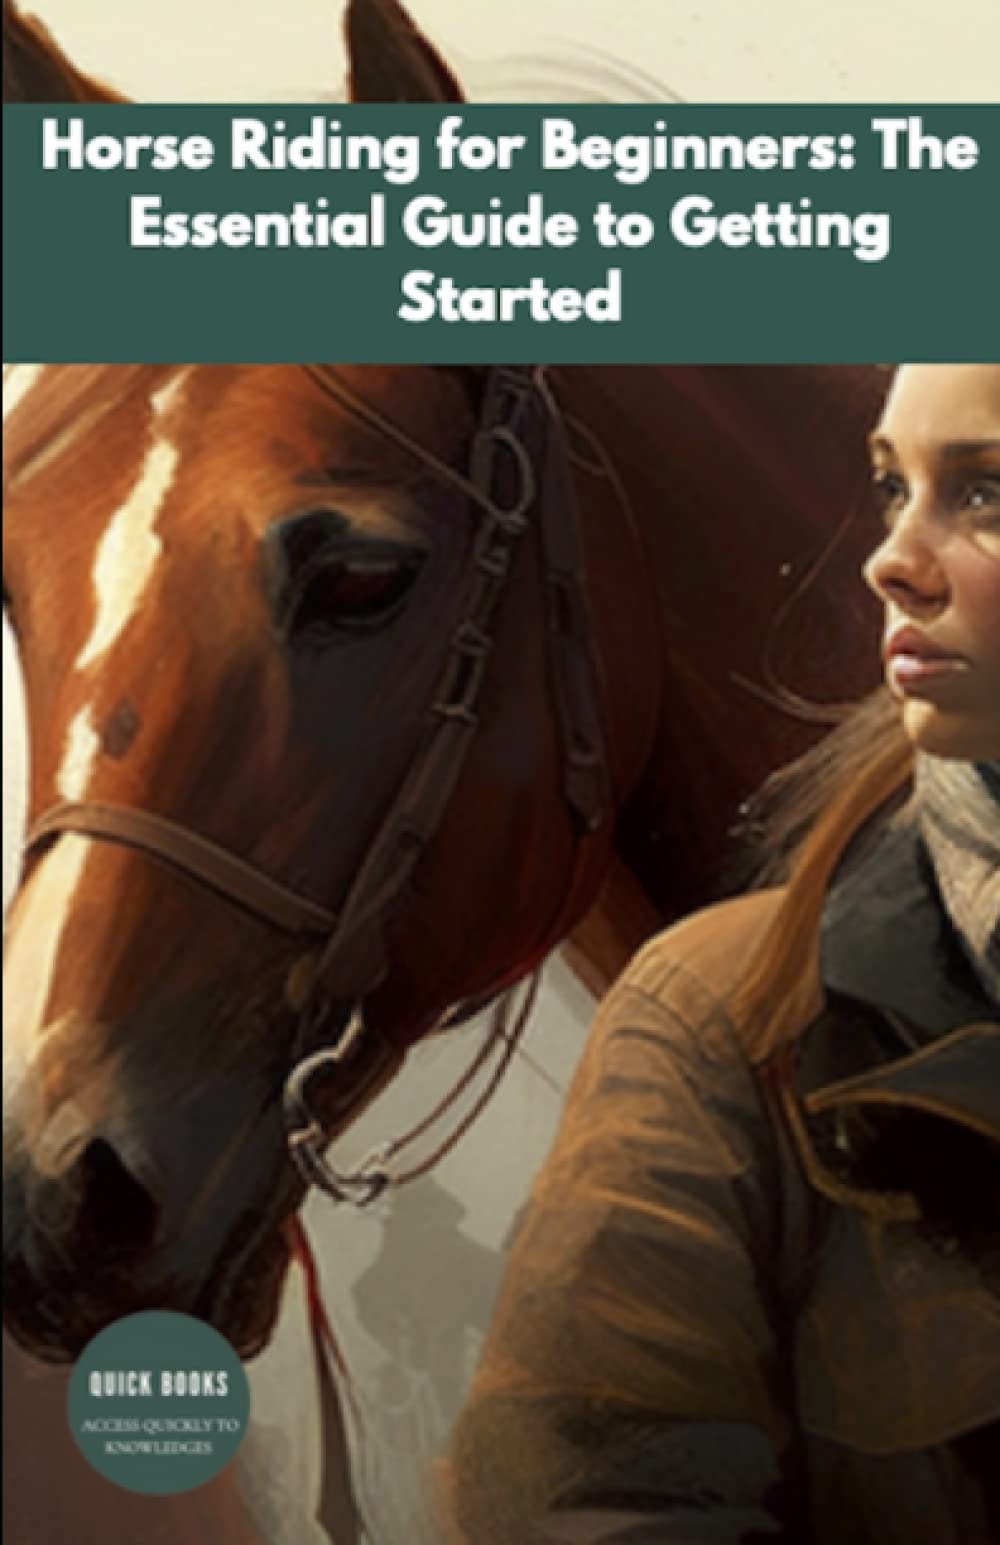 Horse Riding for Beginners: The Essential Guide to Getting Started: Learn the Basics of Horse Riding: A Step-by-Step Guide for Beginners to Start Riding Safely and Confidently